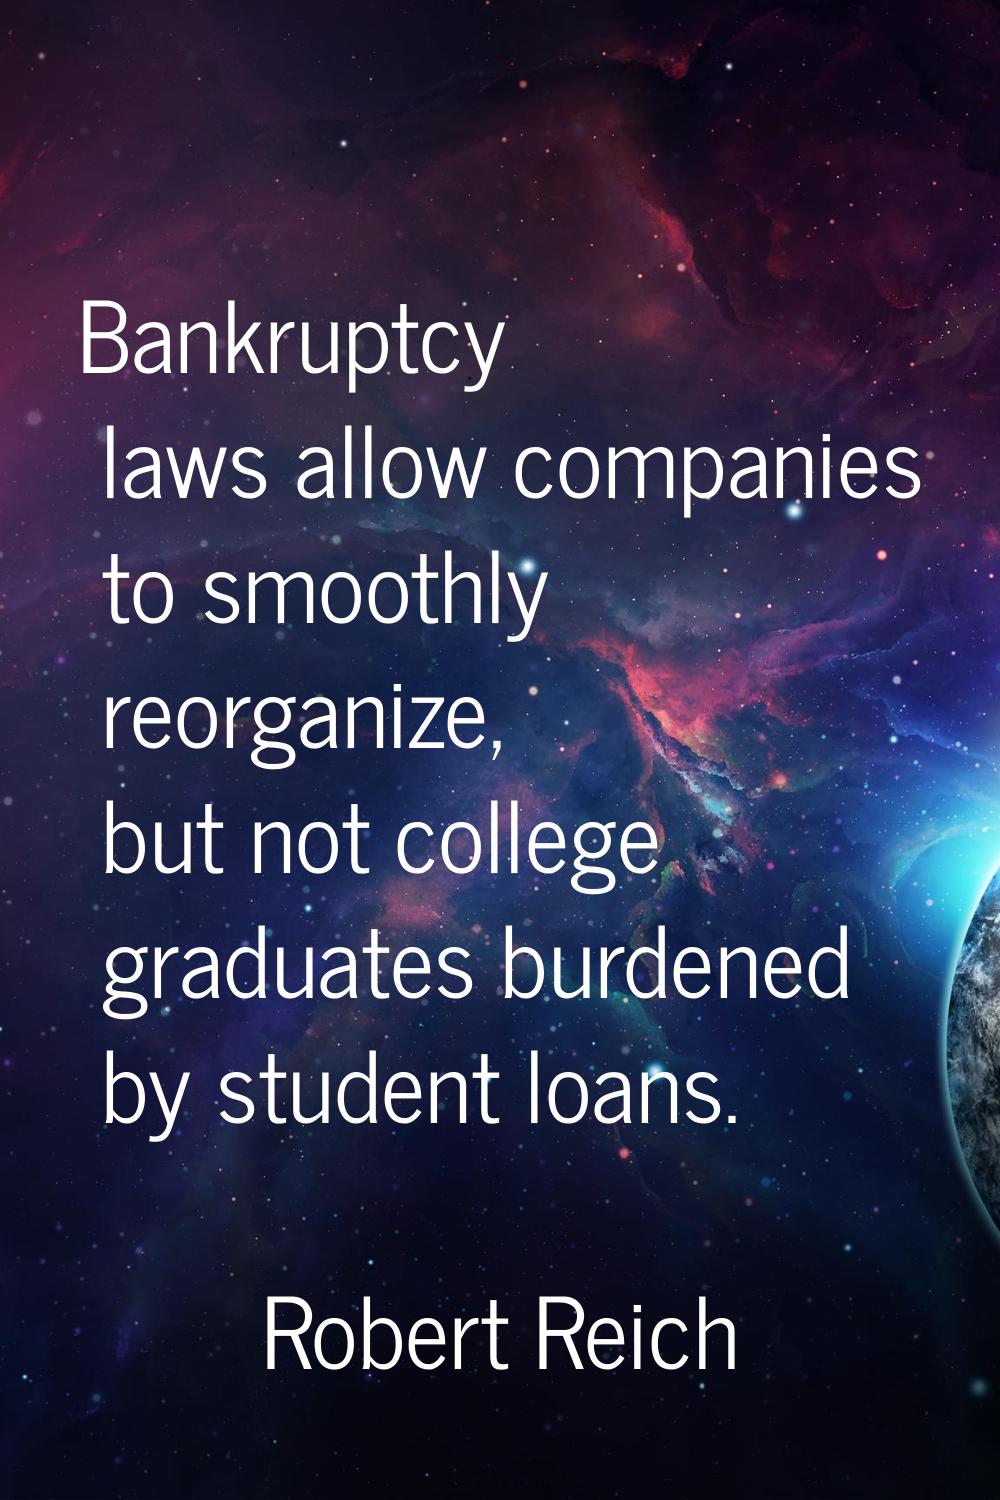 Bankruptcy laws allow companies to smoothly reorganize, but not college graduates burdened by stude